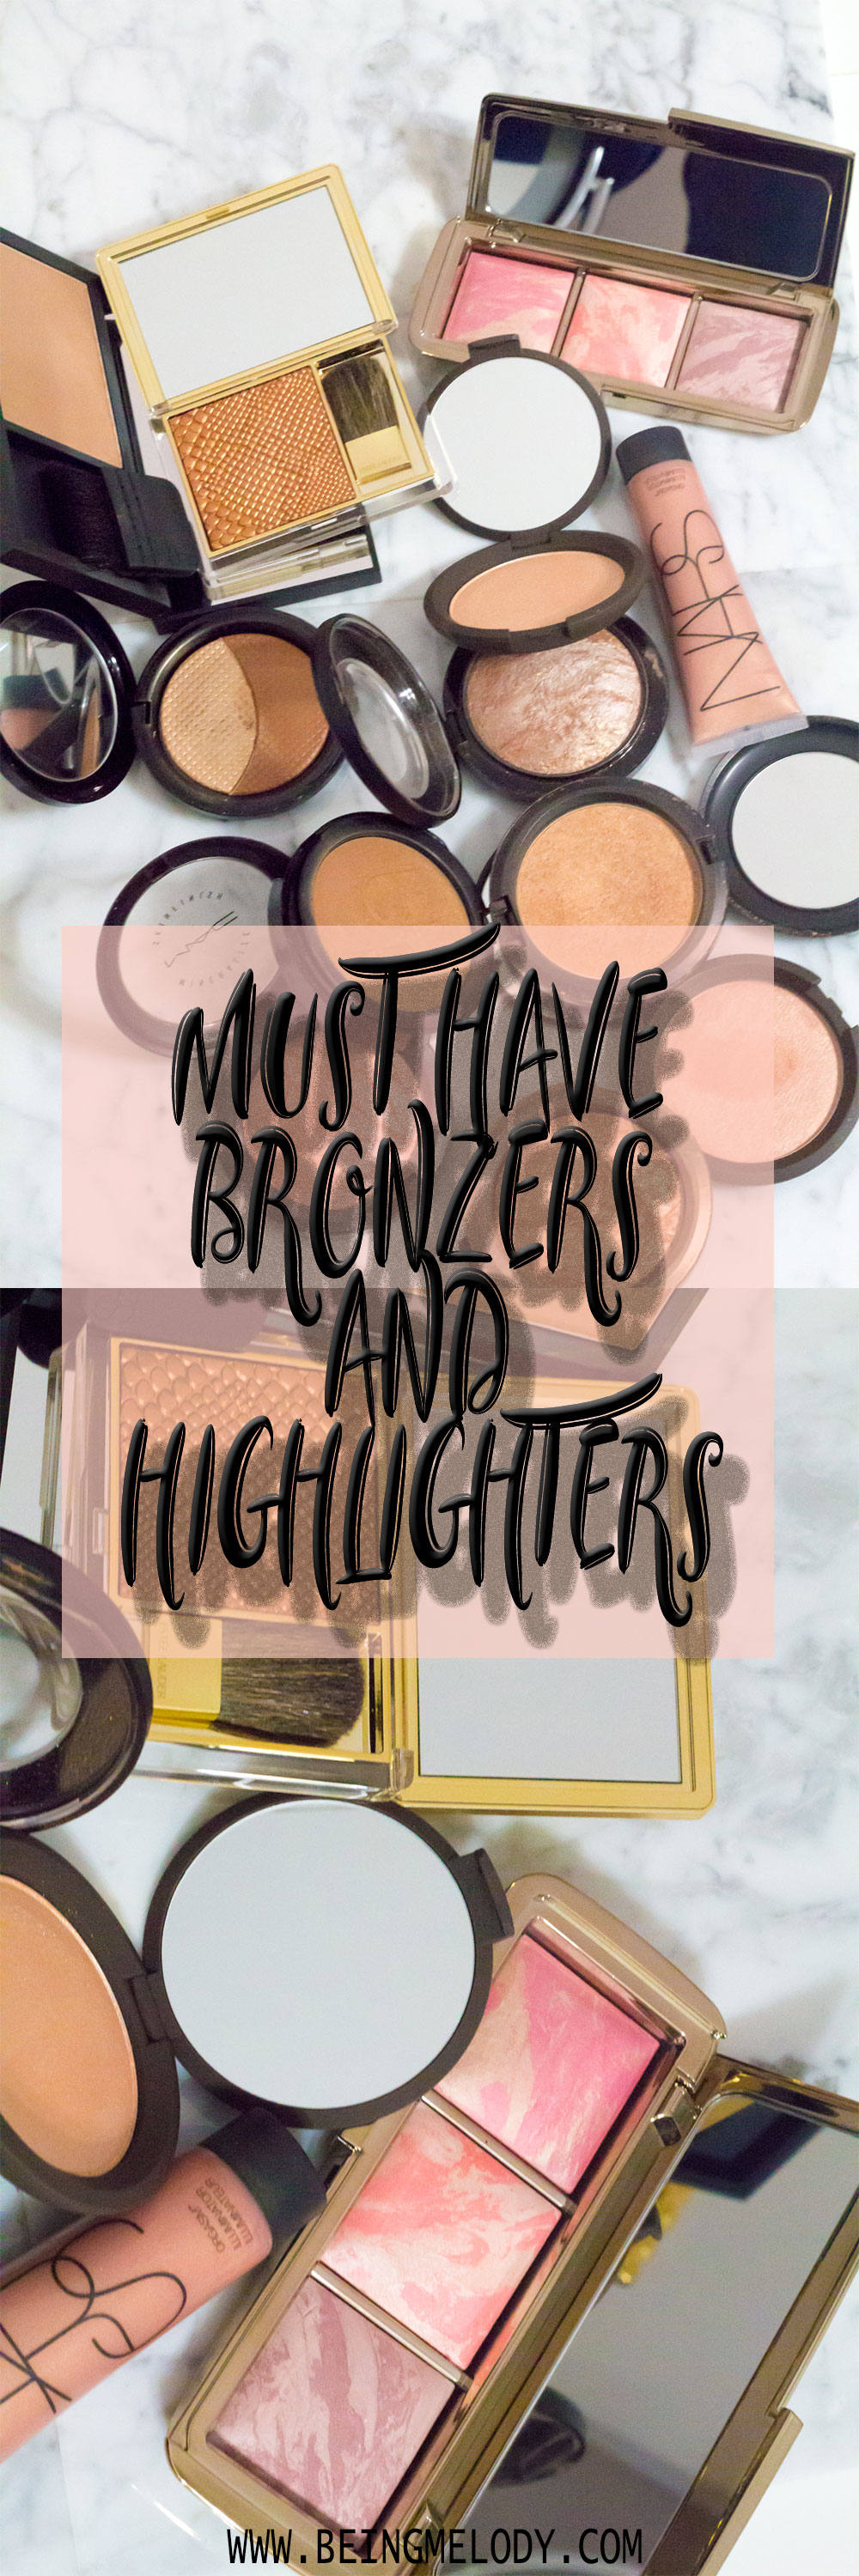 Must Have Bronzers to add to any makeup collection.|www.beingmelody.com| @beingmelody